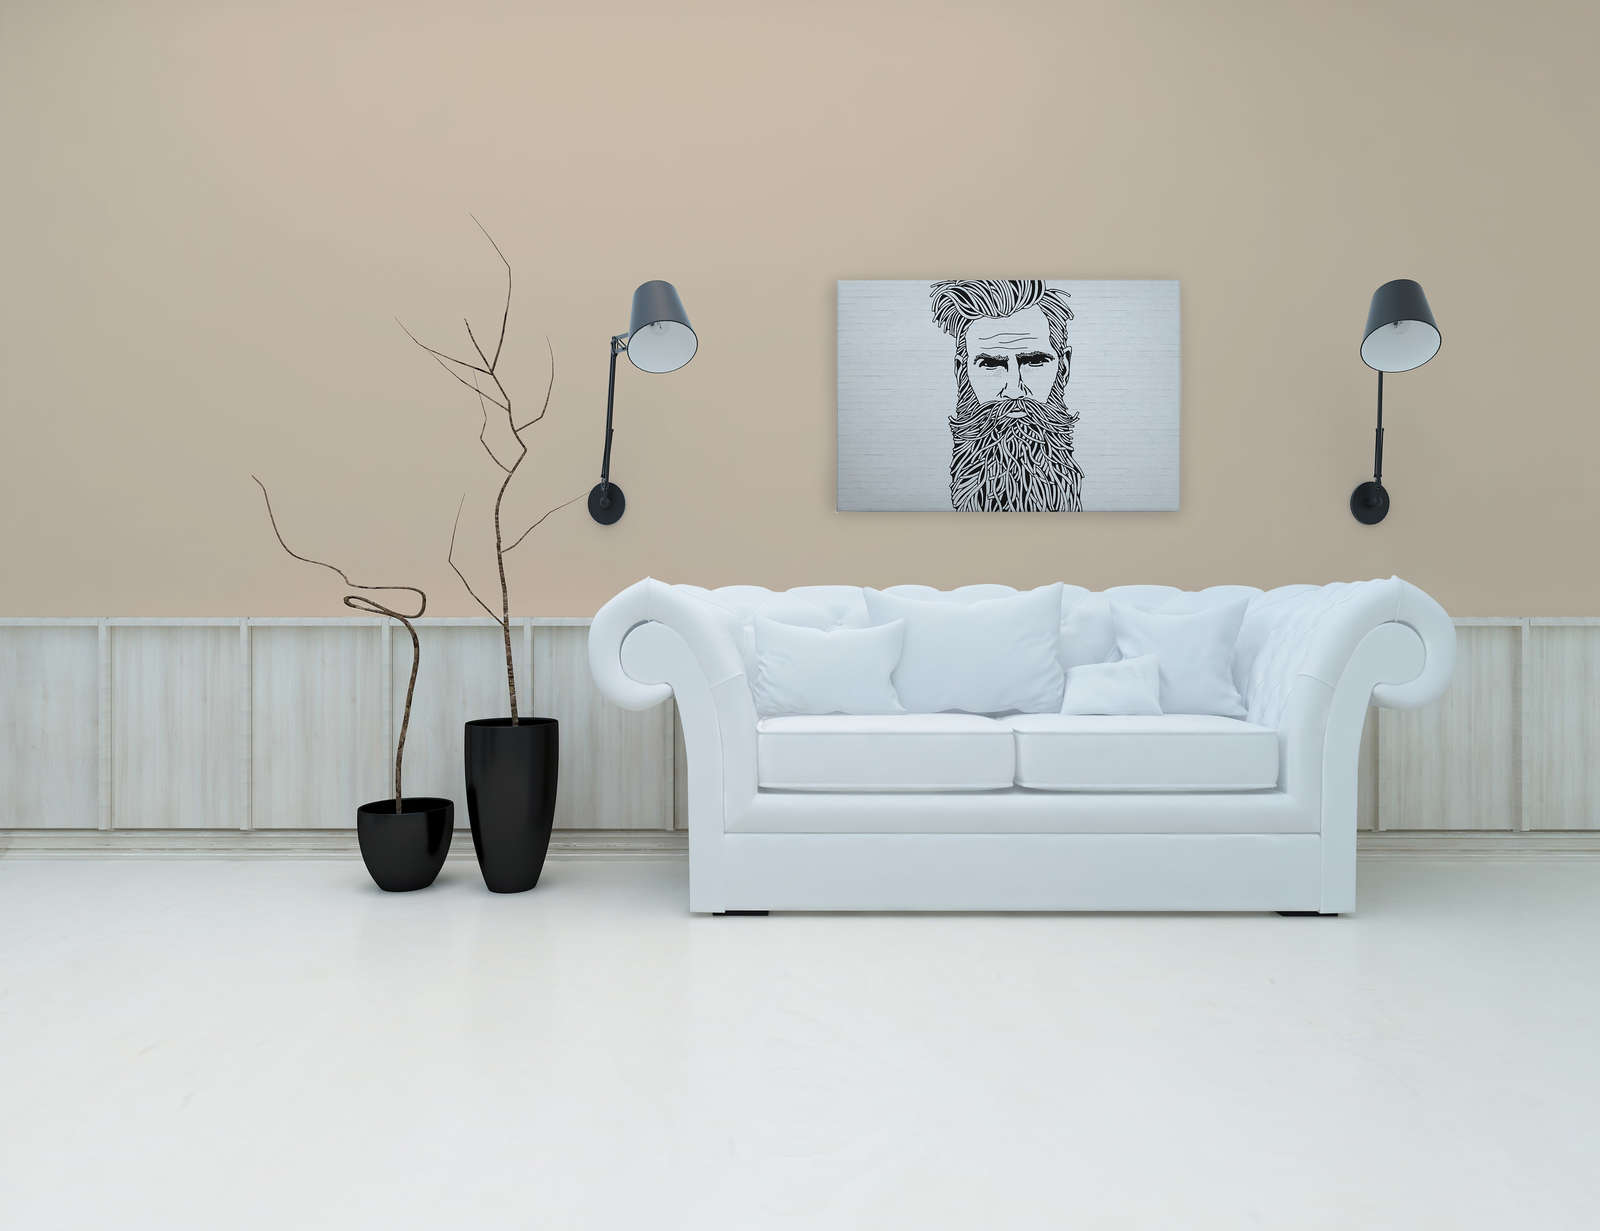             White Canvas Painting Stone Look with Men Portrait in Drawing Style - 0.90 m x 0.60 m
        